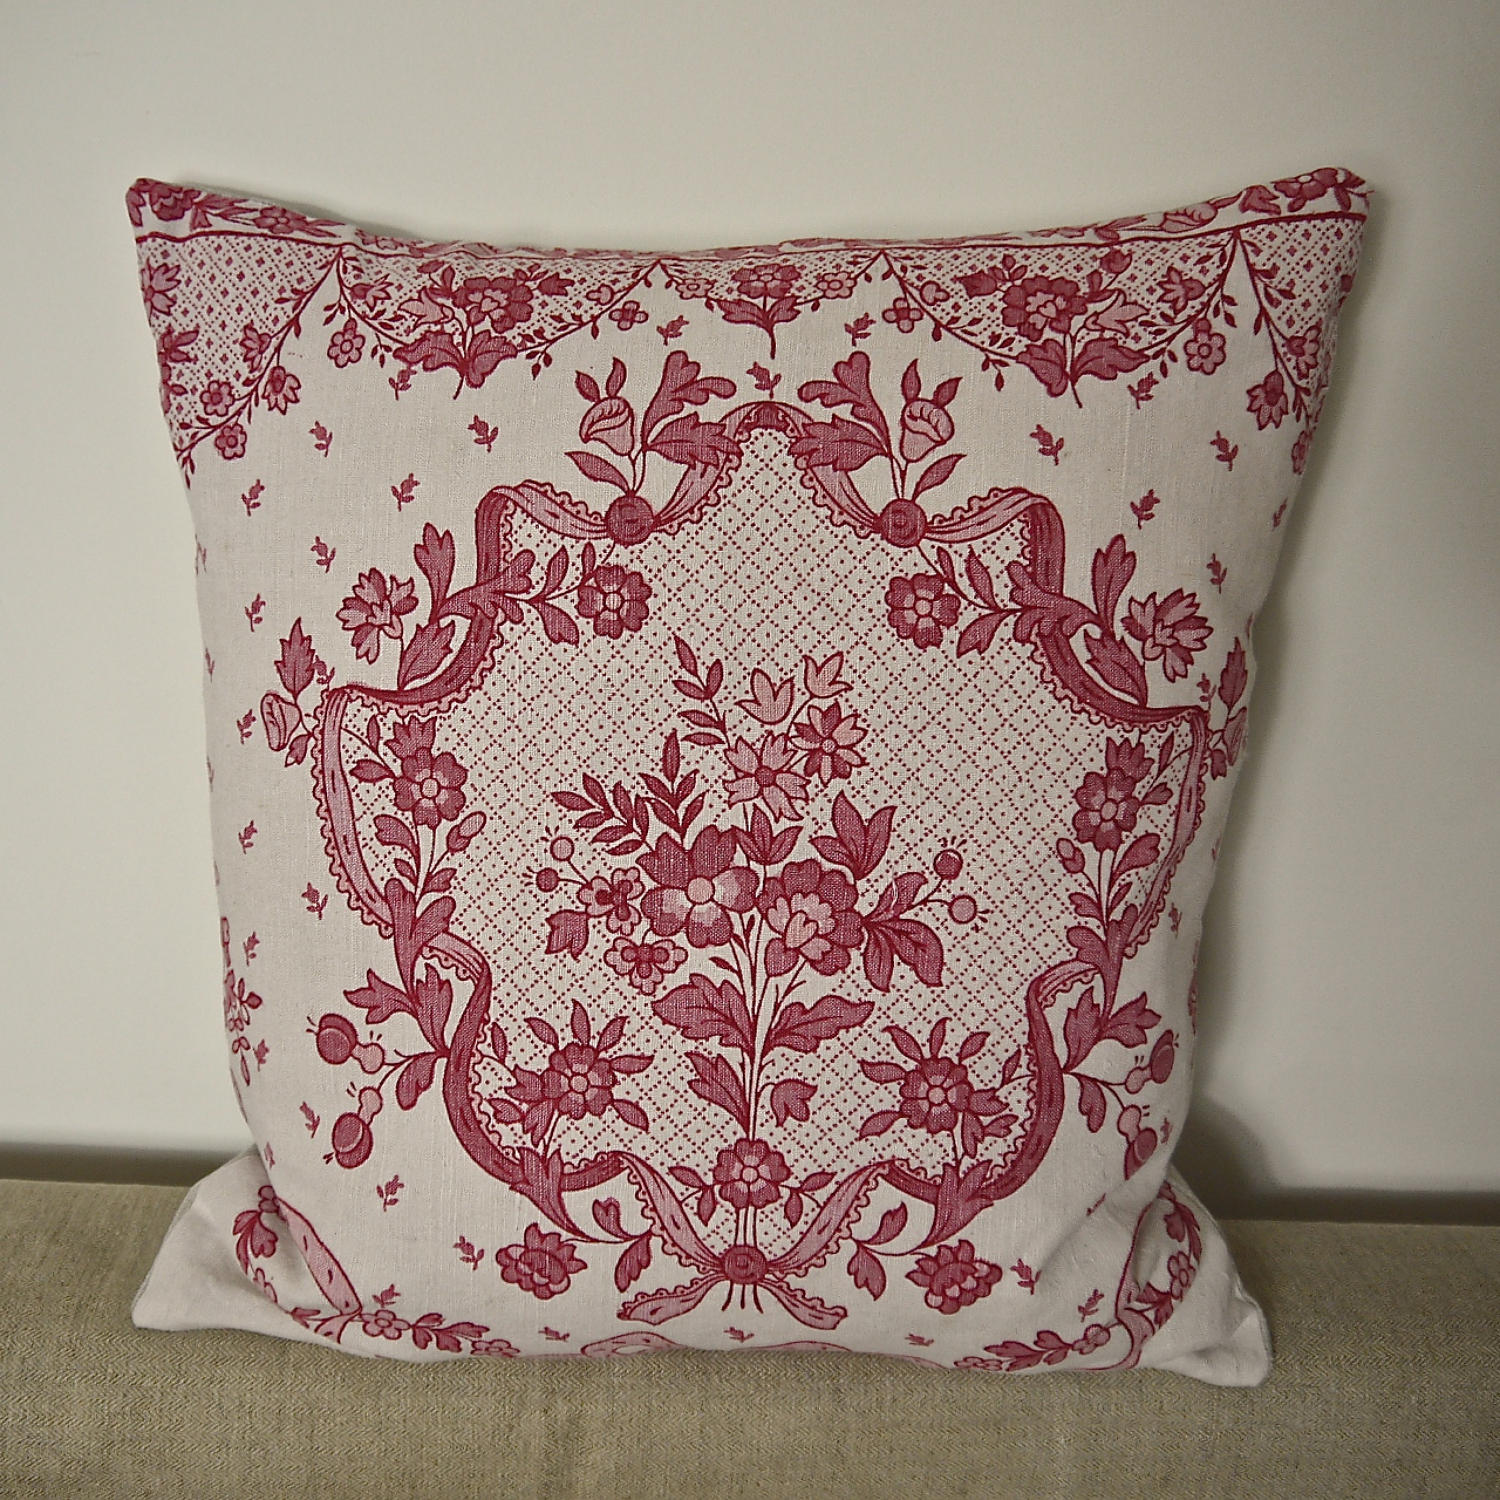 Early 20th century French pretty red floral linen cushion